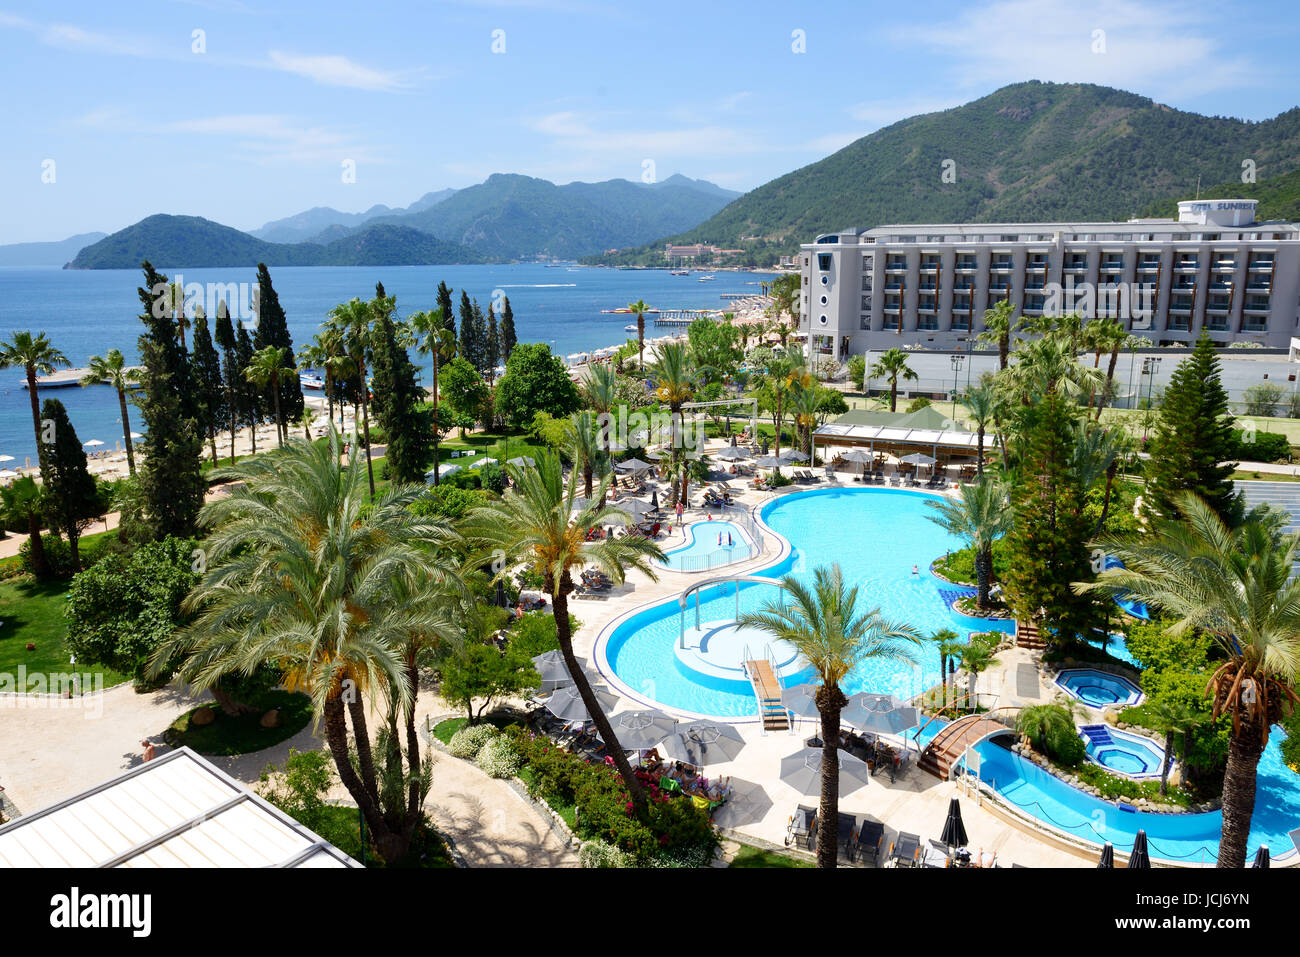 MARMARIS, TURKEY - MAY 20: The tourists enjoing their vacation in luxury hotel on May 20, 2013 in Marmaris, Turkey. More then 36 mln tourists have vis Stock Photo